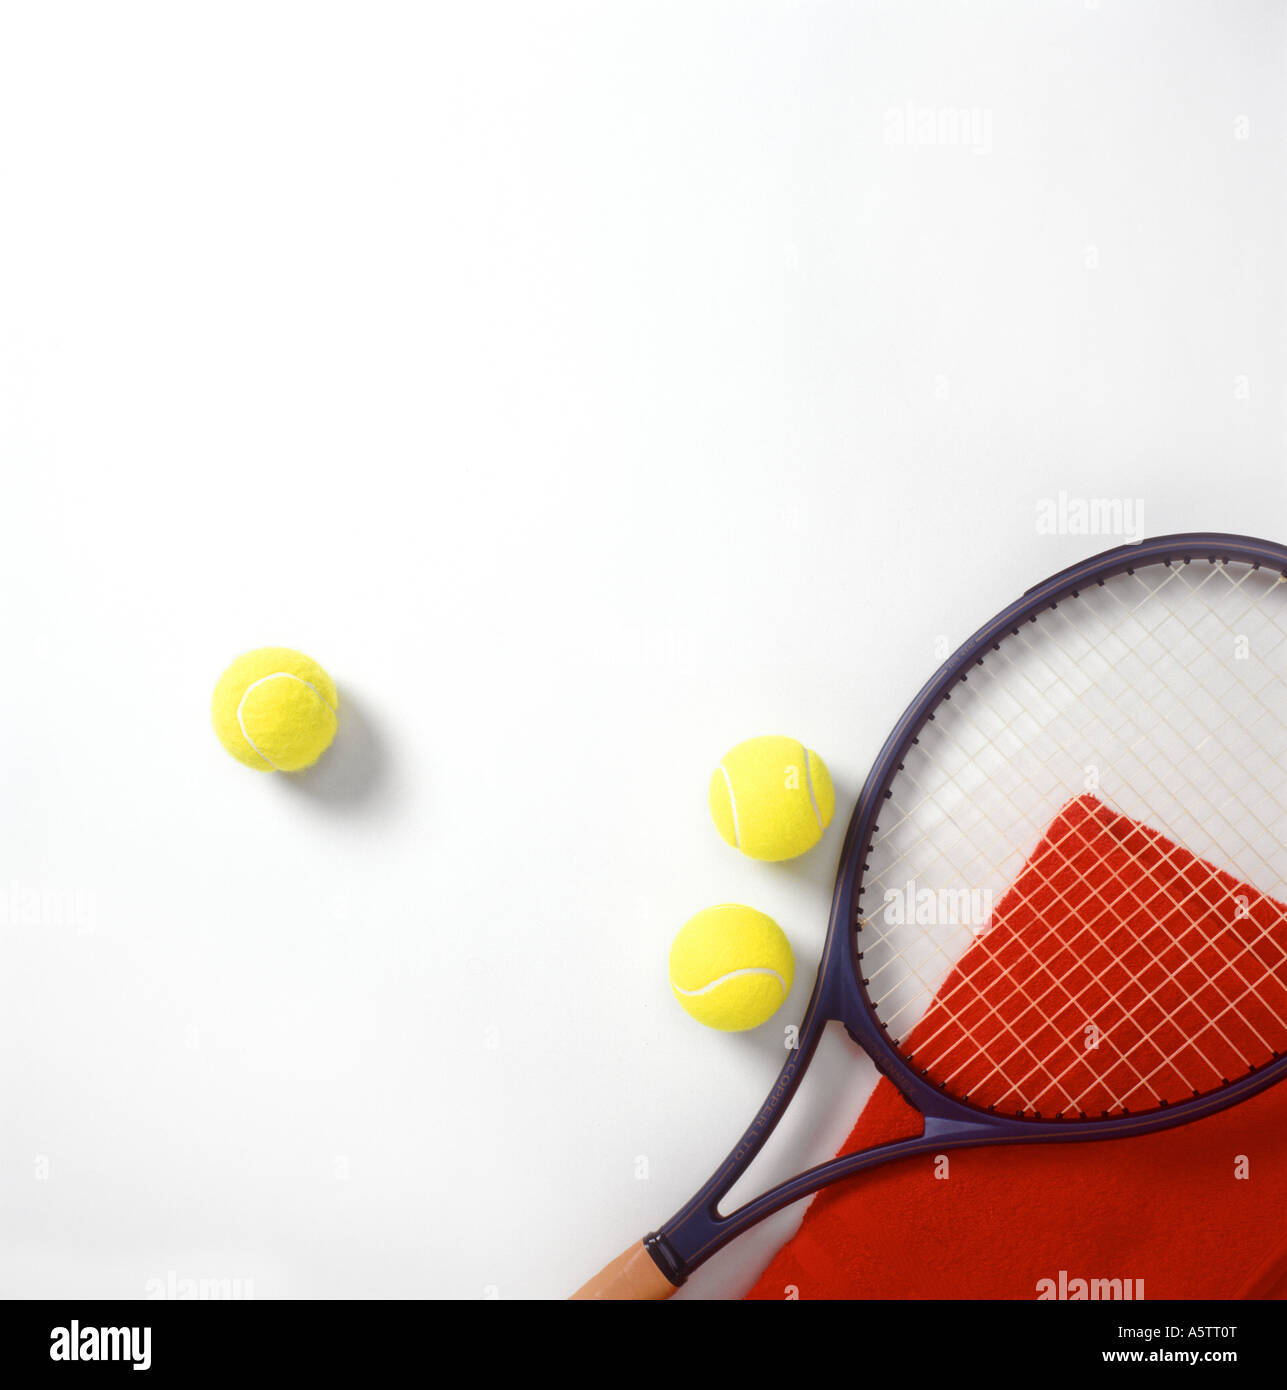 Tennis Studio Still Life With Balls And Racket Cut Out Stock Photo